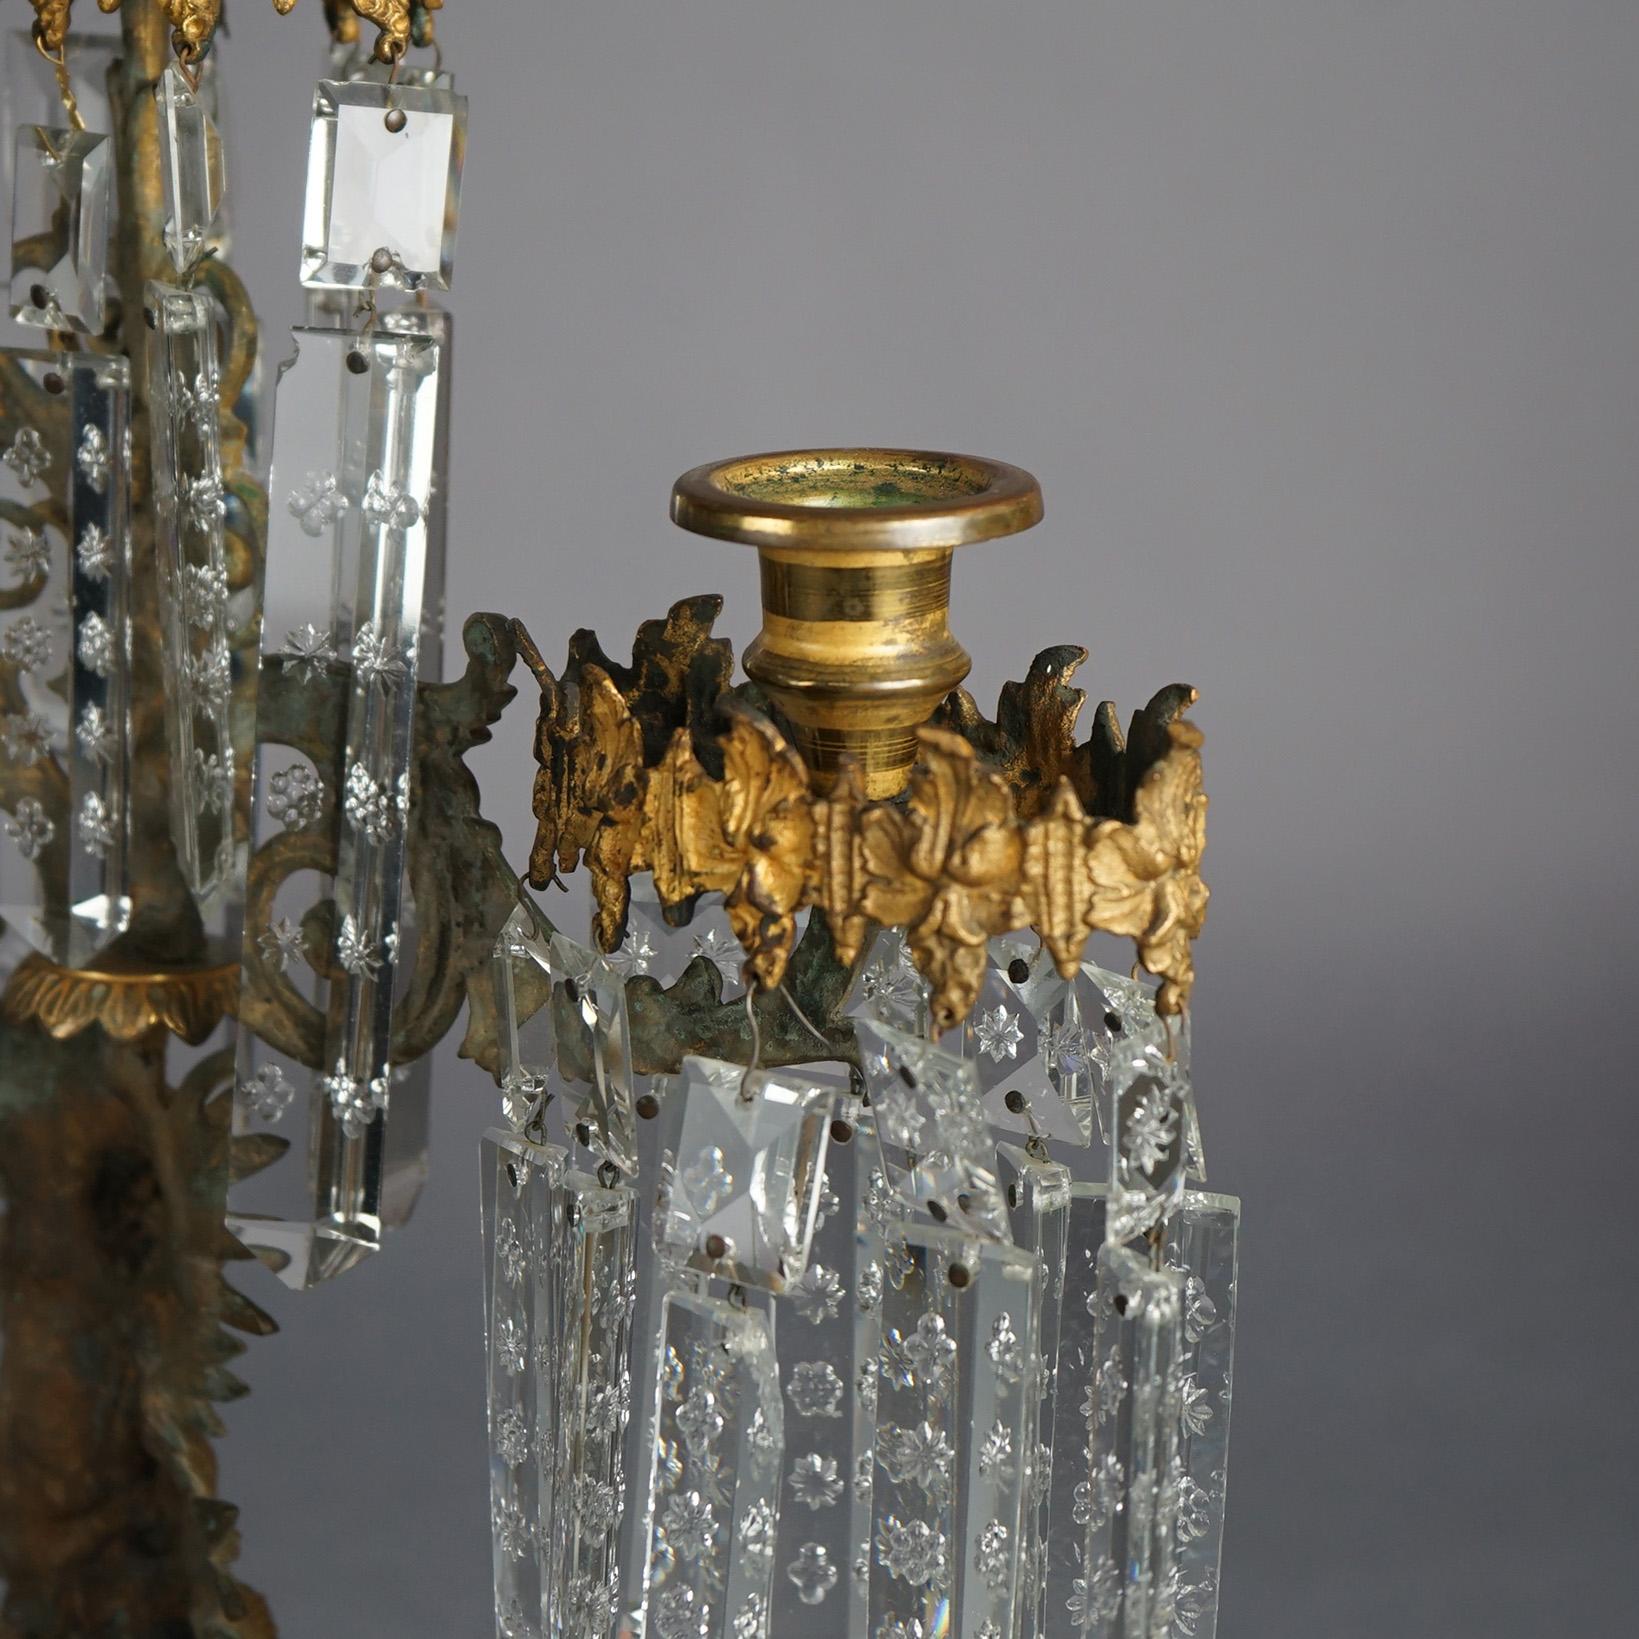 Antique Gilt Bronze American Girandole Candelabras with Marble & Crystals C1880 For Sale 11